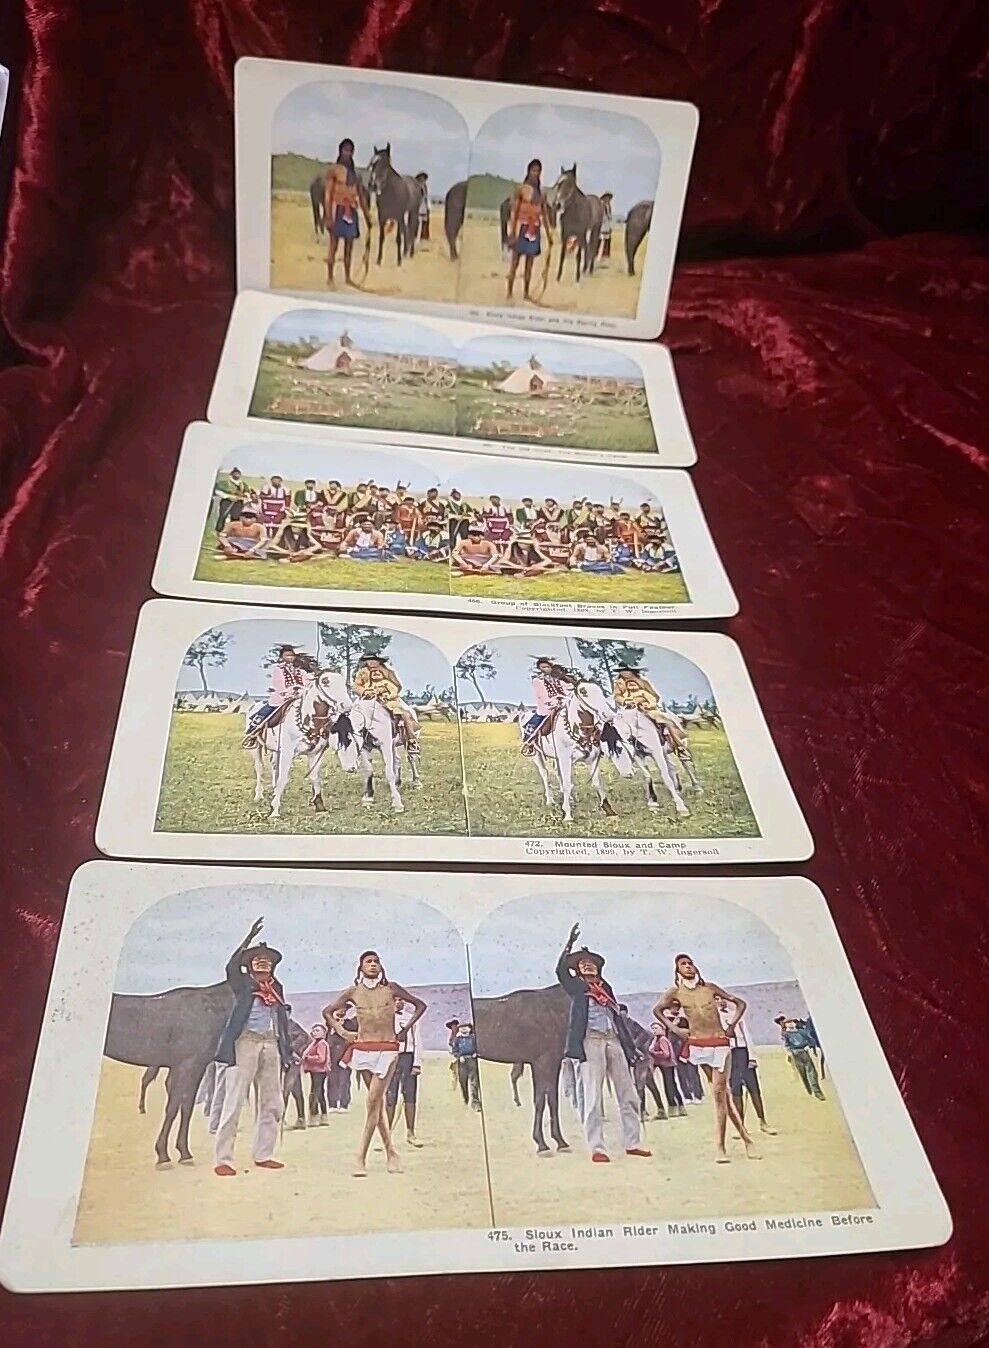 Vintage NATIVE AMERICAN Color Stereo View Stereograph Cards (Lot of 5)